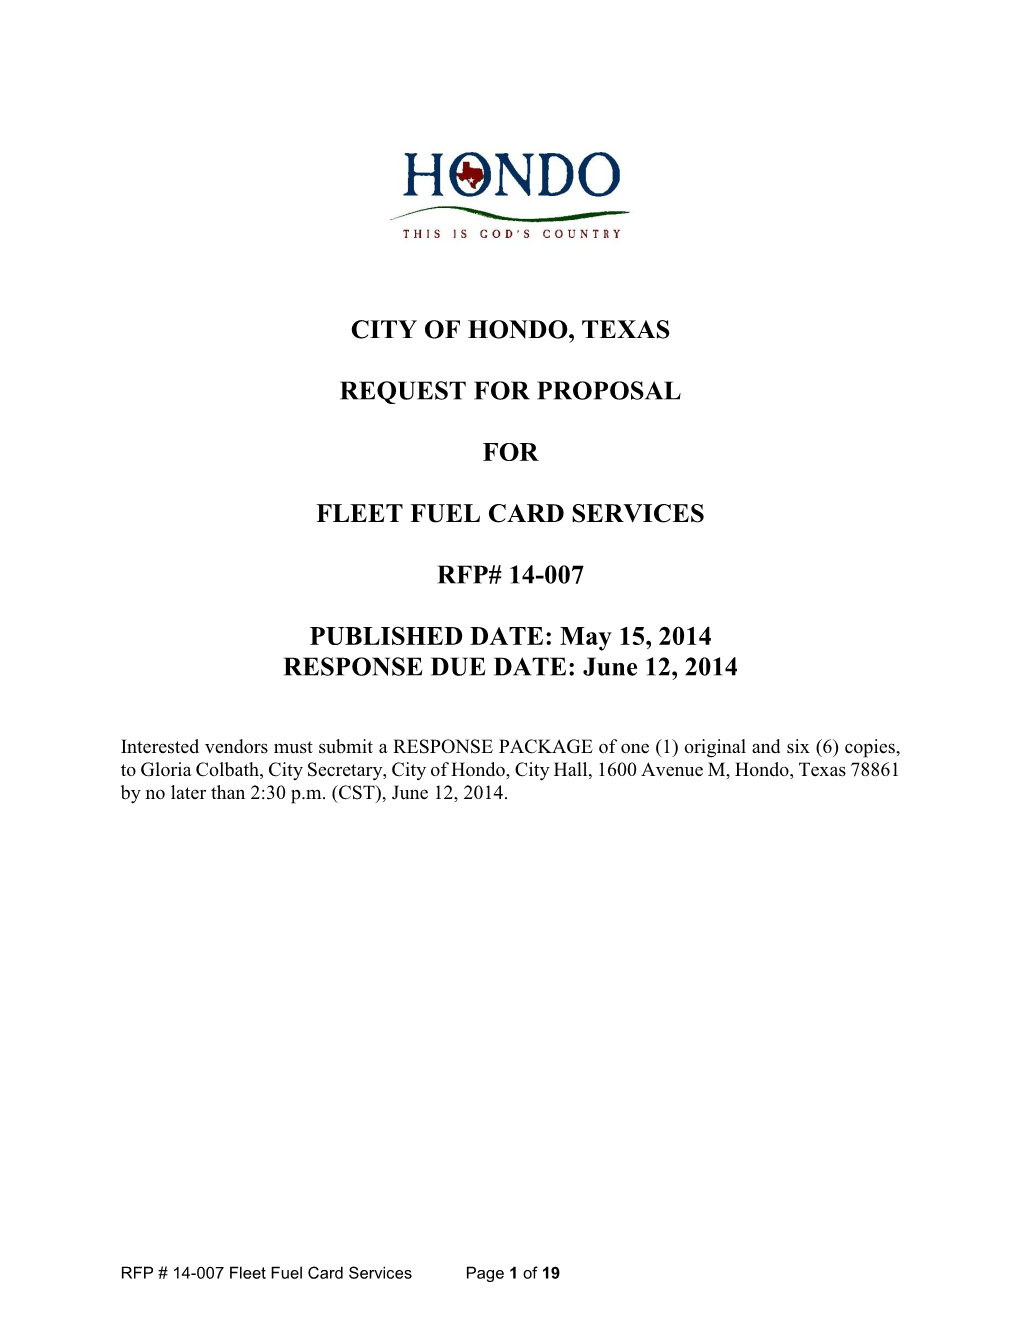 City of Hondo, Texas Request for Proposal for Fleet